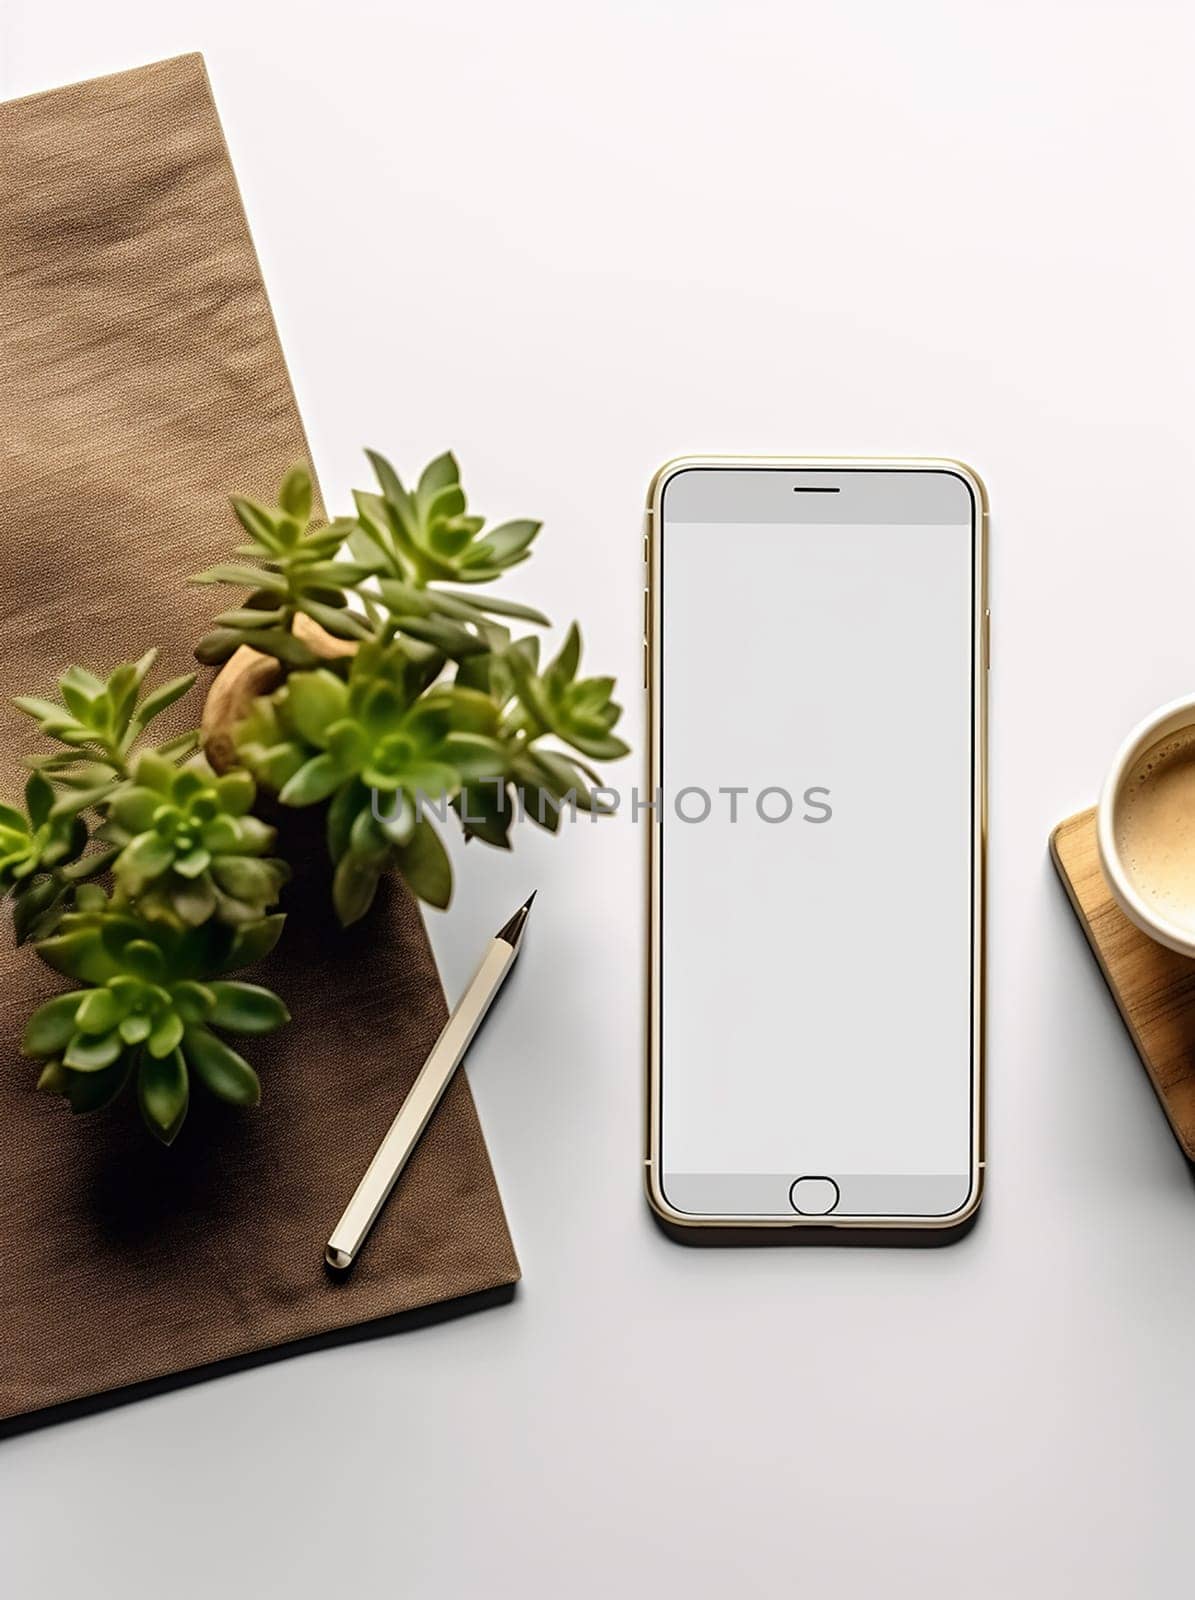 Smartphone on a desk, website mock up, with plant, notebook, and pencil by Hype2art